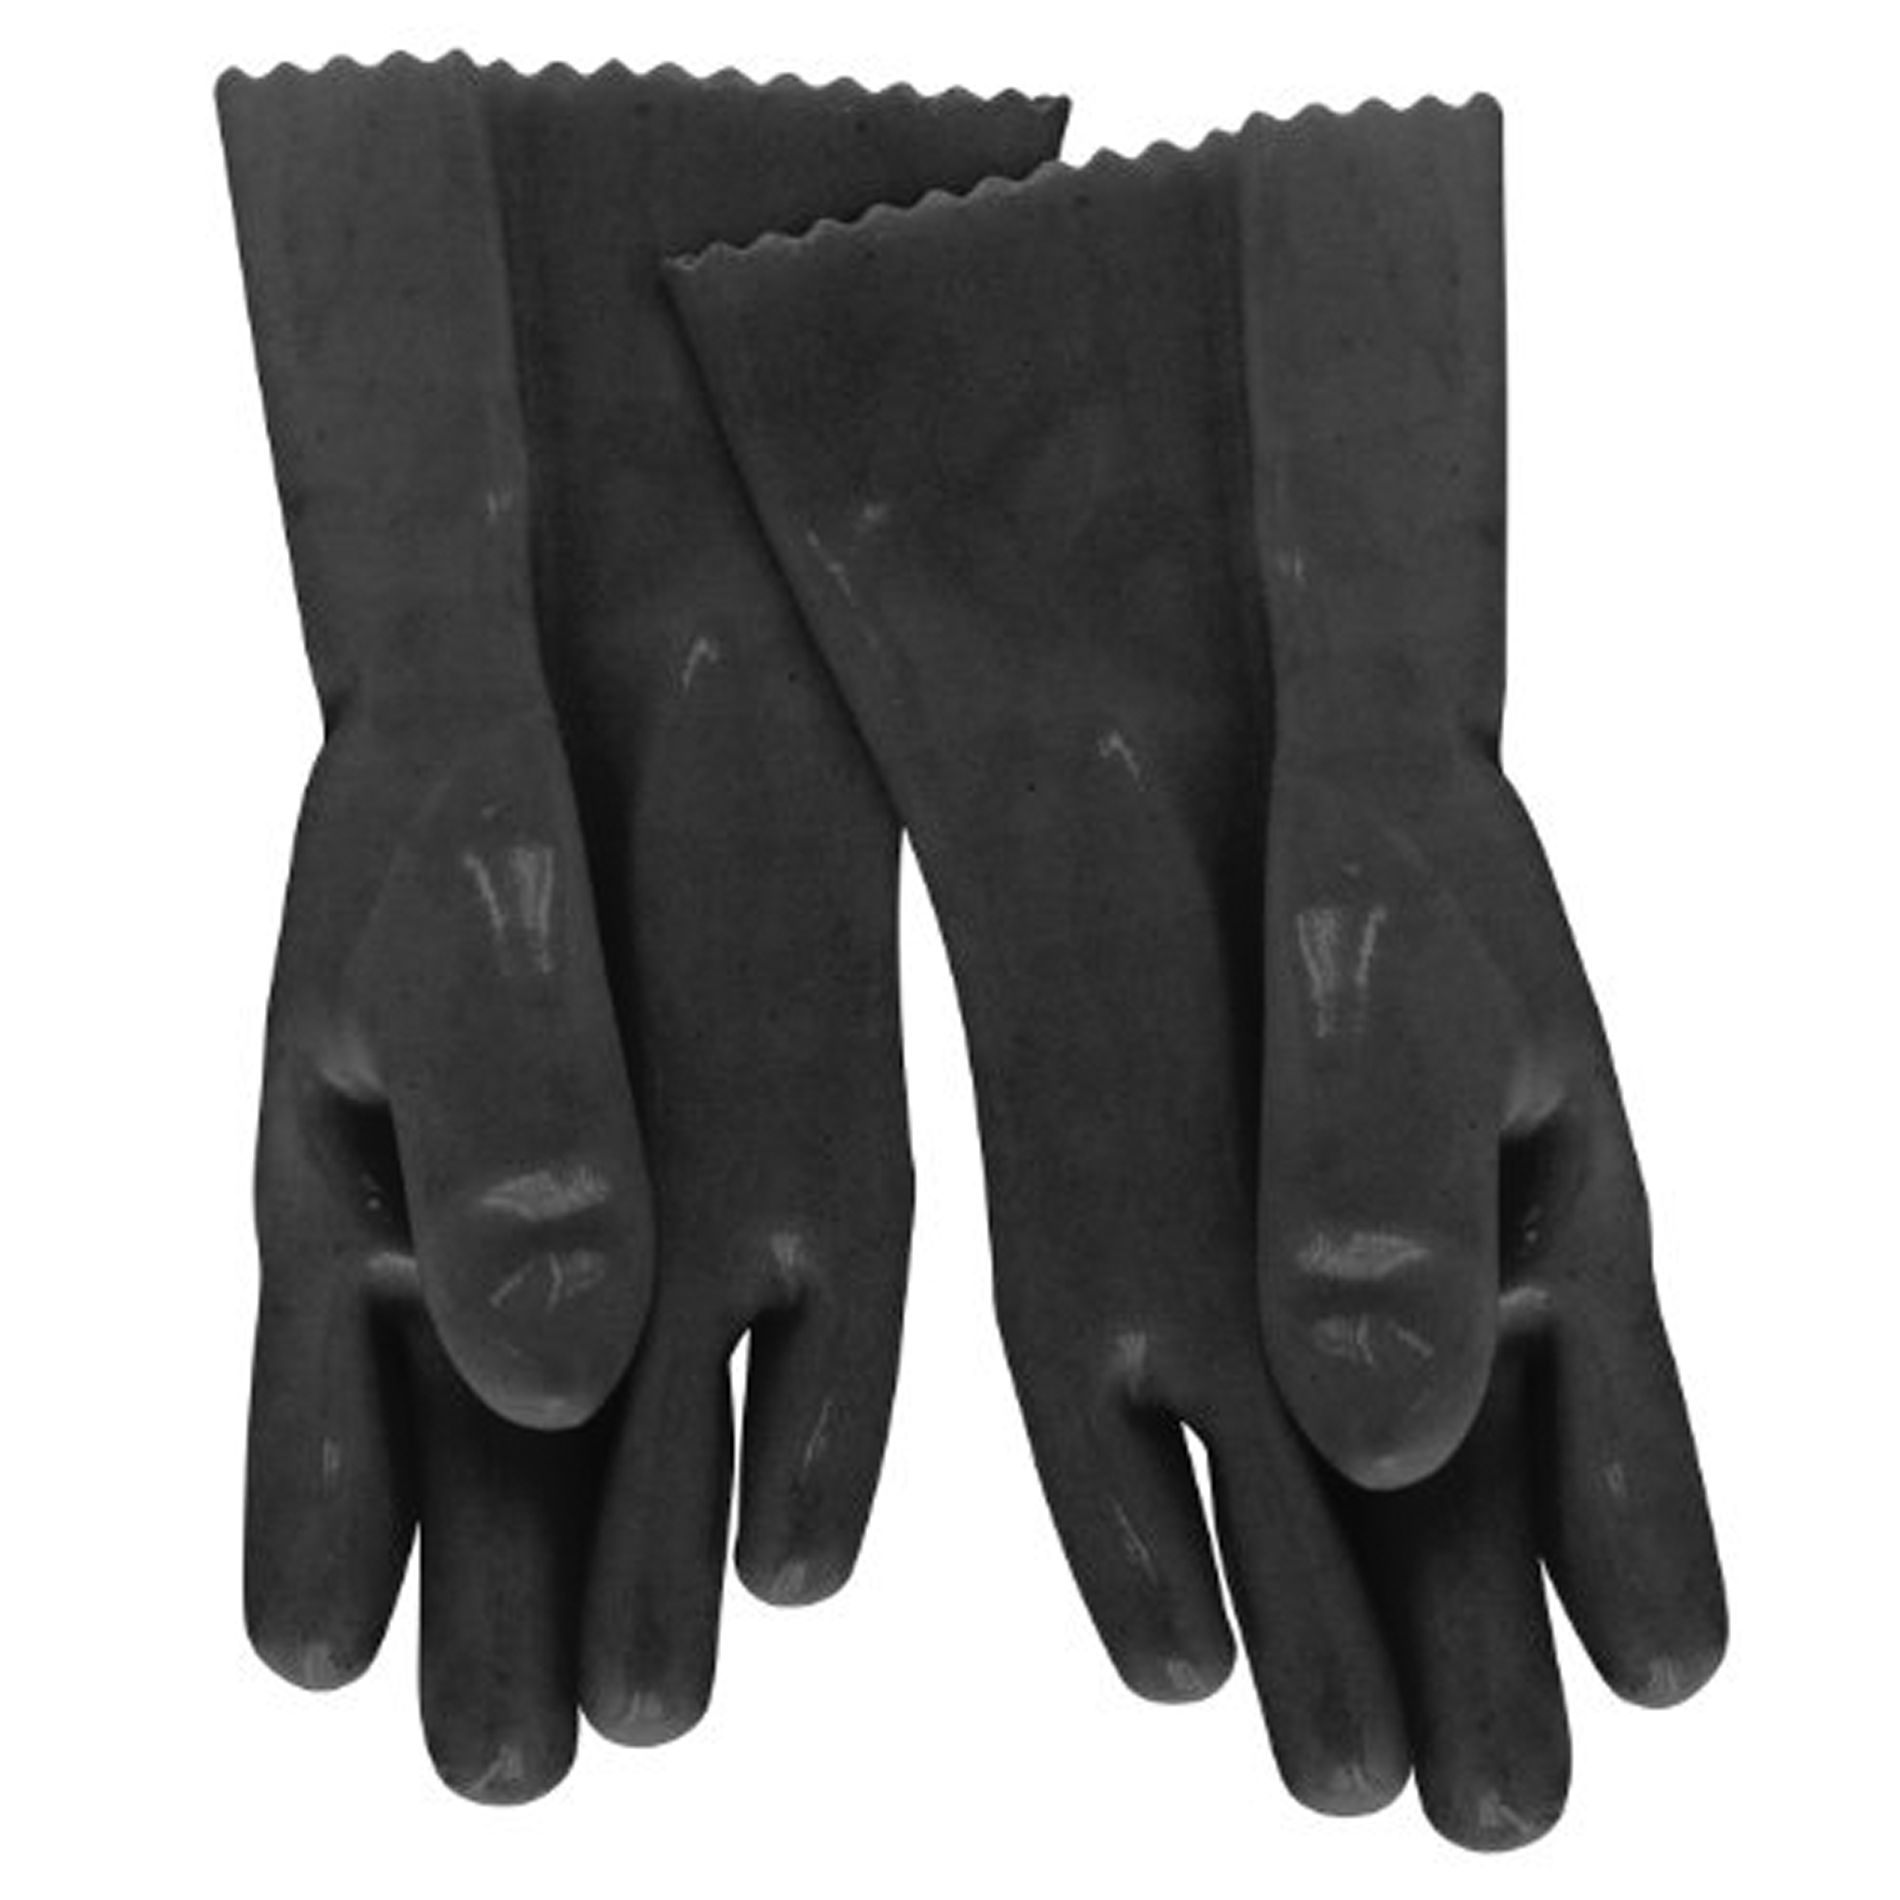 Mr. Bar-B-Que Insulated Grilling Gloves